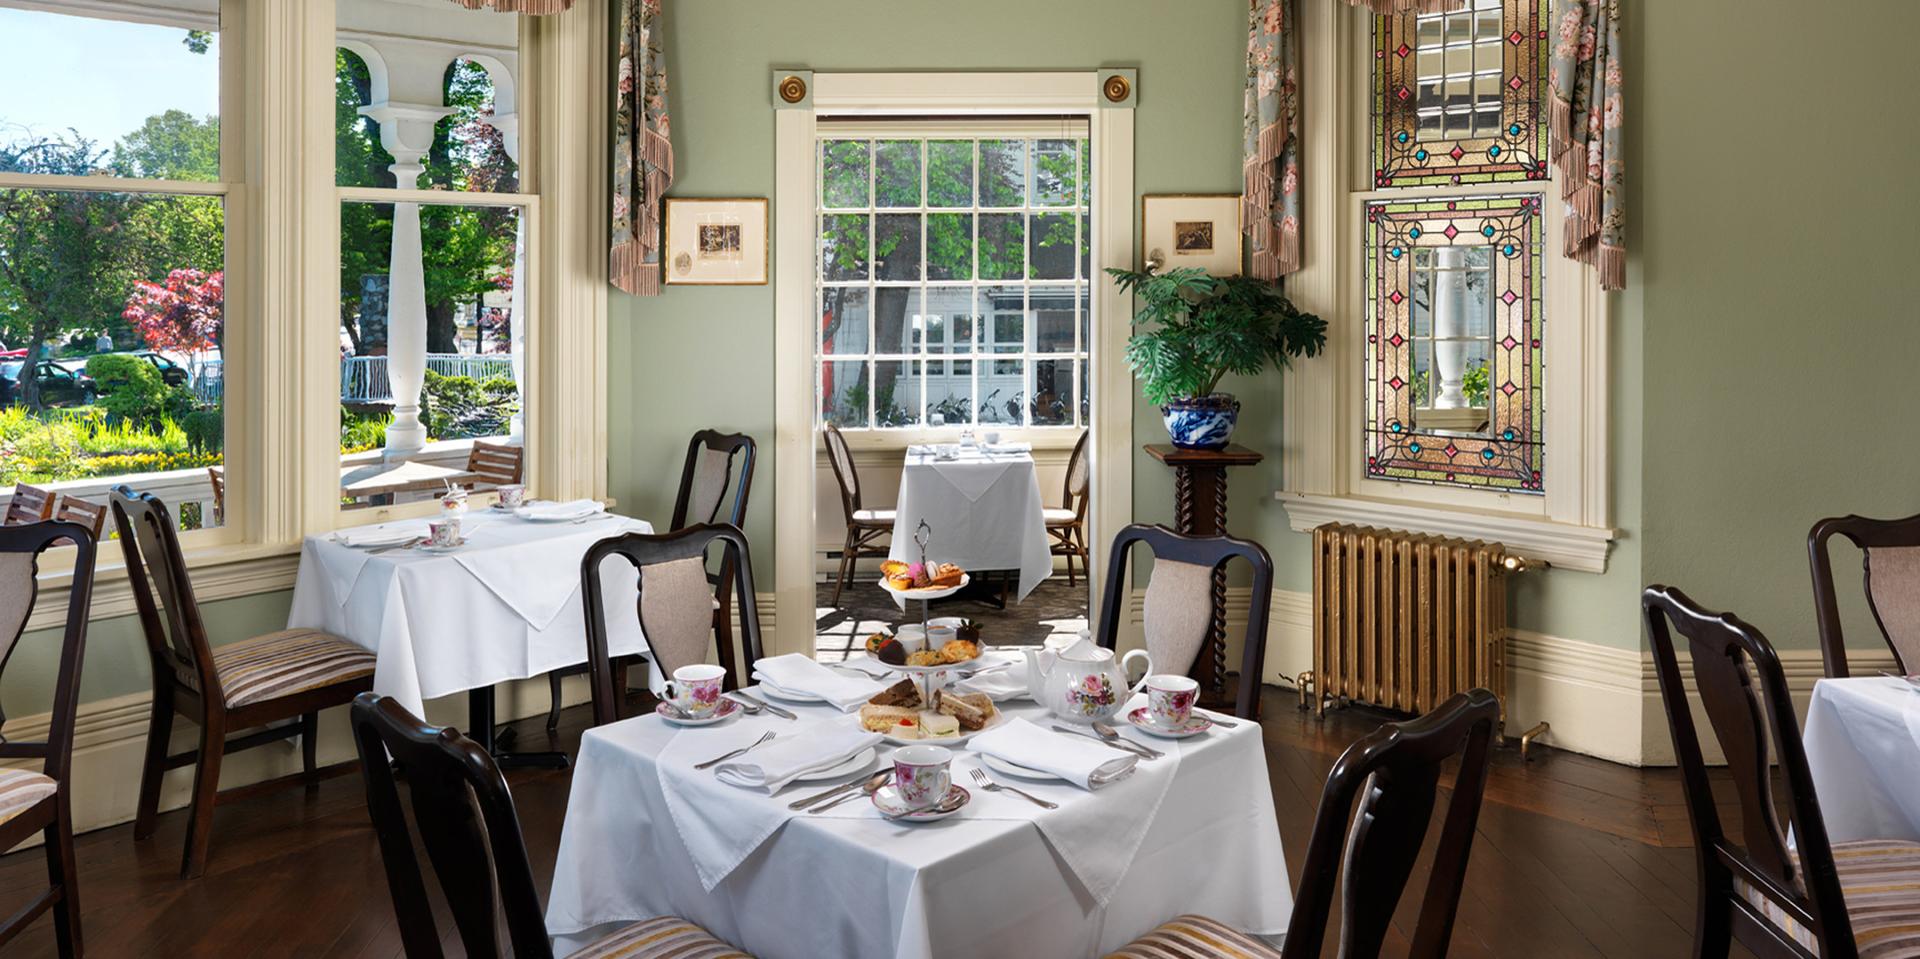 Enjoy a traditional Afternoon Tea at the Pendray Tea House.